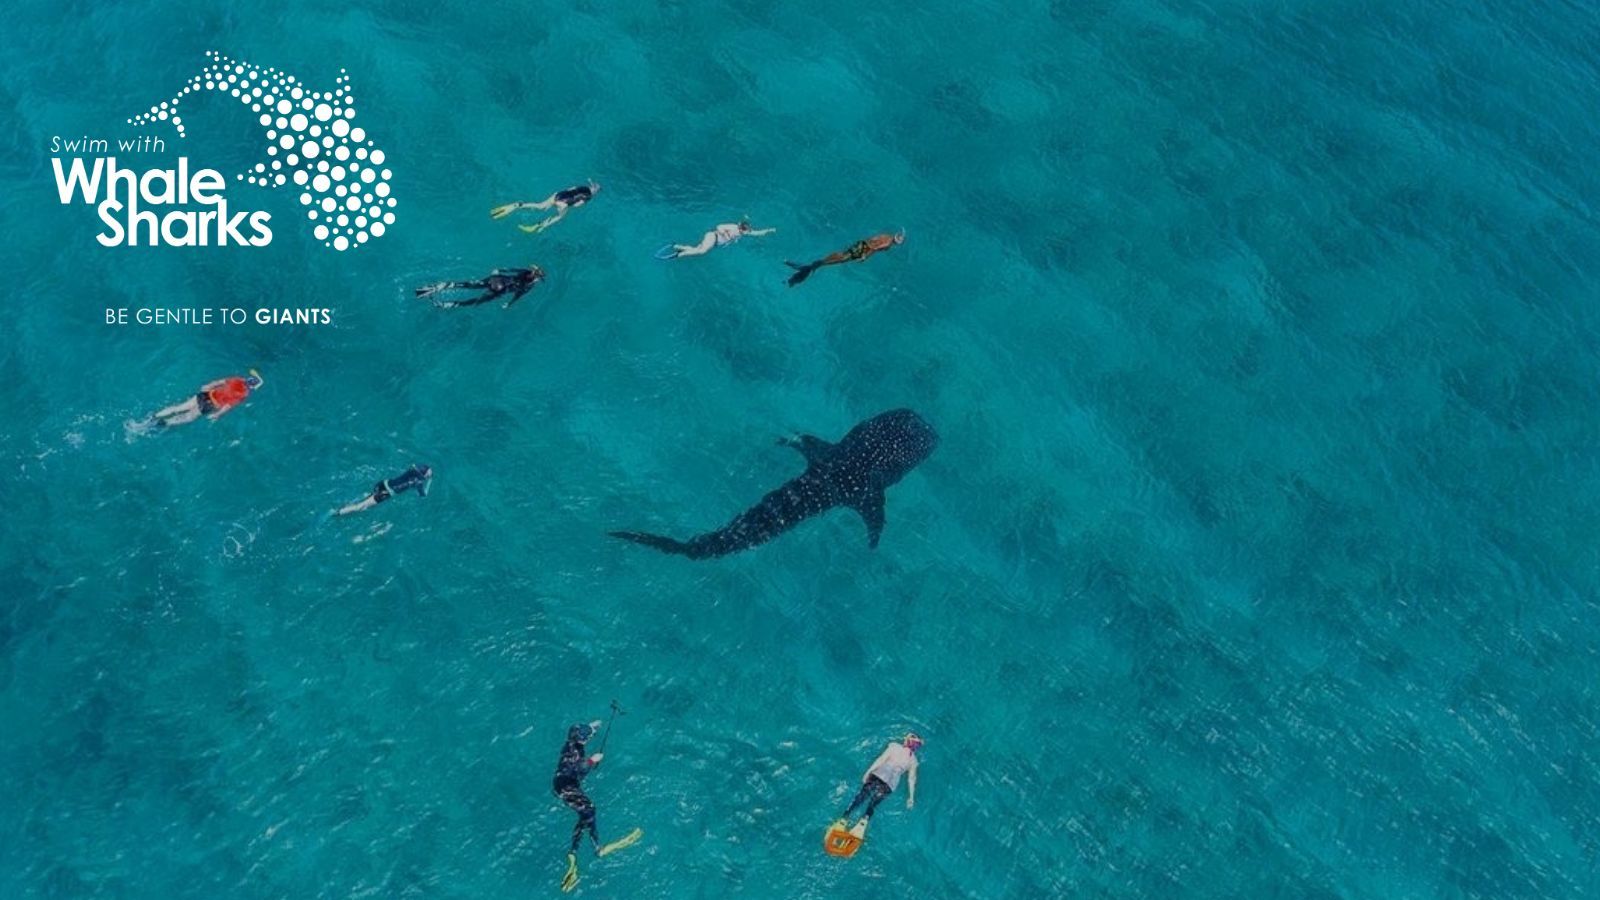 The scale on a whale shark on show, in an image from the Be Gentle to Giants campaign. Photo: Lewis Jeffries